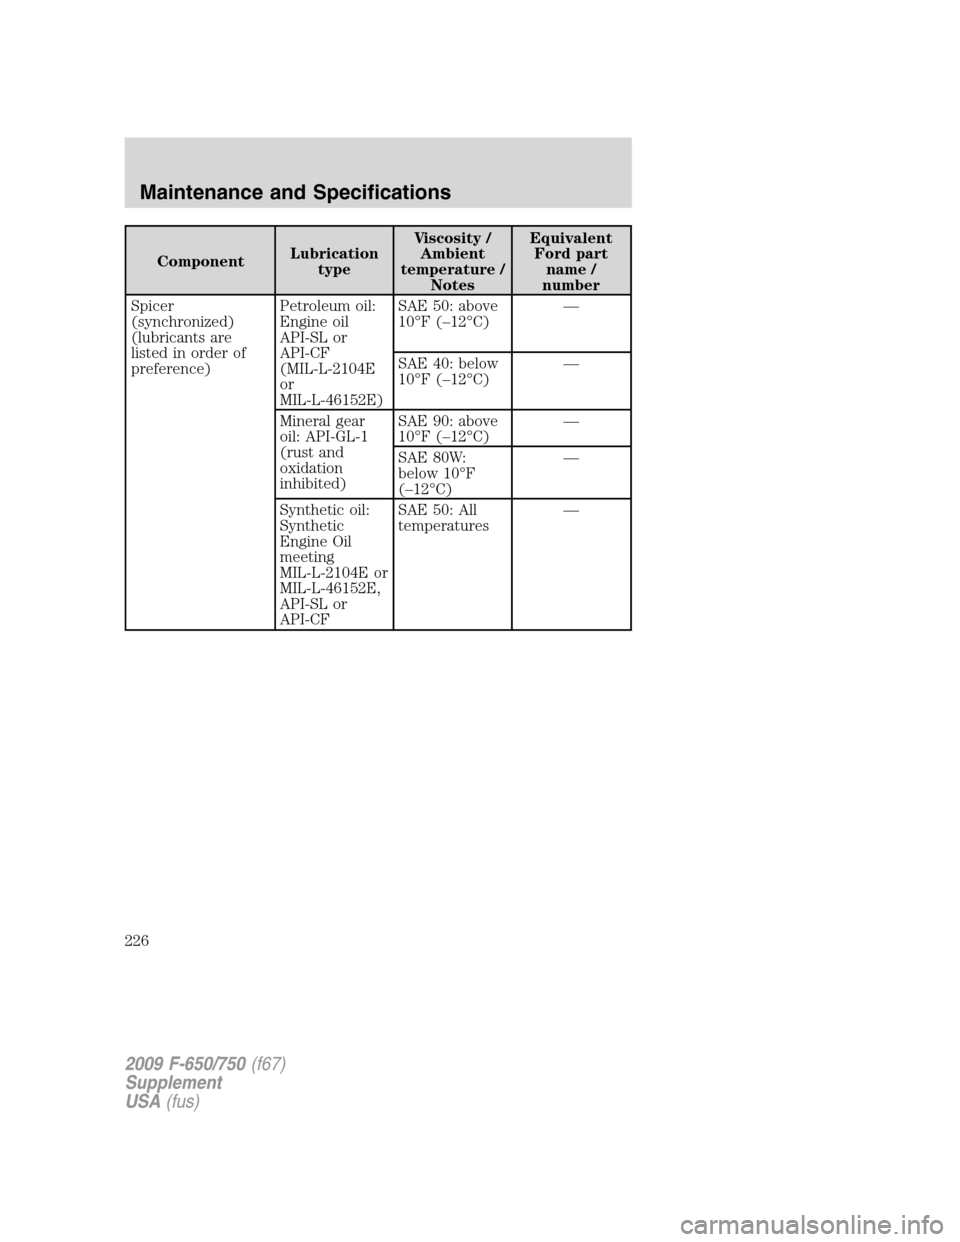 FORD F650 2009 12.G Owners Manual ComponentLubrication
typeViscosity /
Ambient
temperature /
NotesEquivalent
Ford part
name /
number
Spicer
(synchronized)
(lubricants are
listed in order of
preference)Petroleum oil:
Engine oil
API-SL 